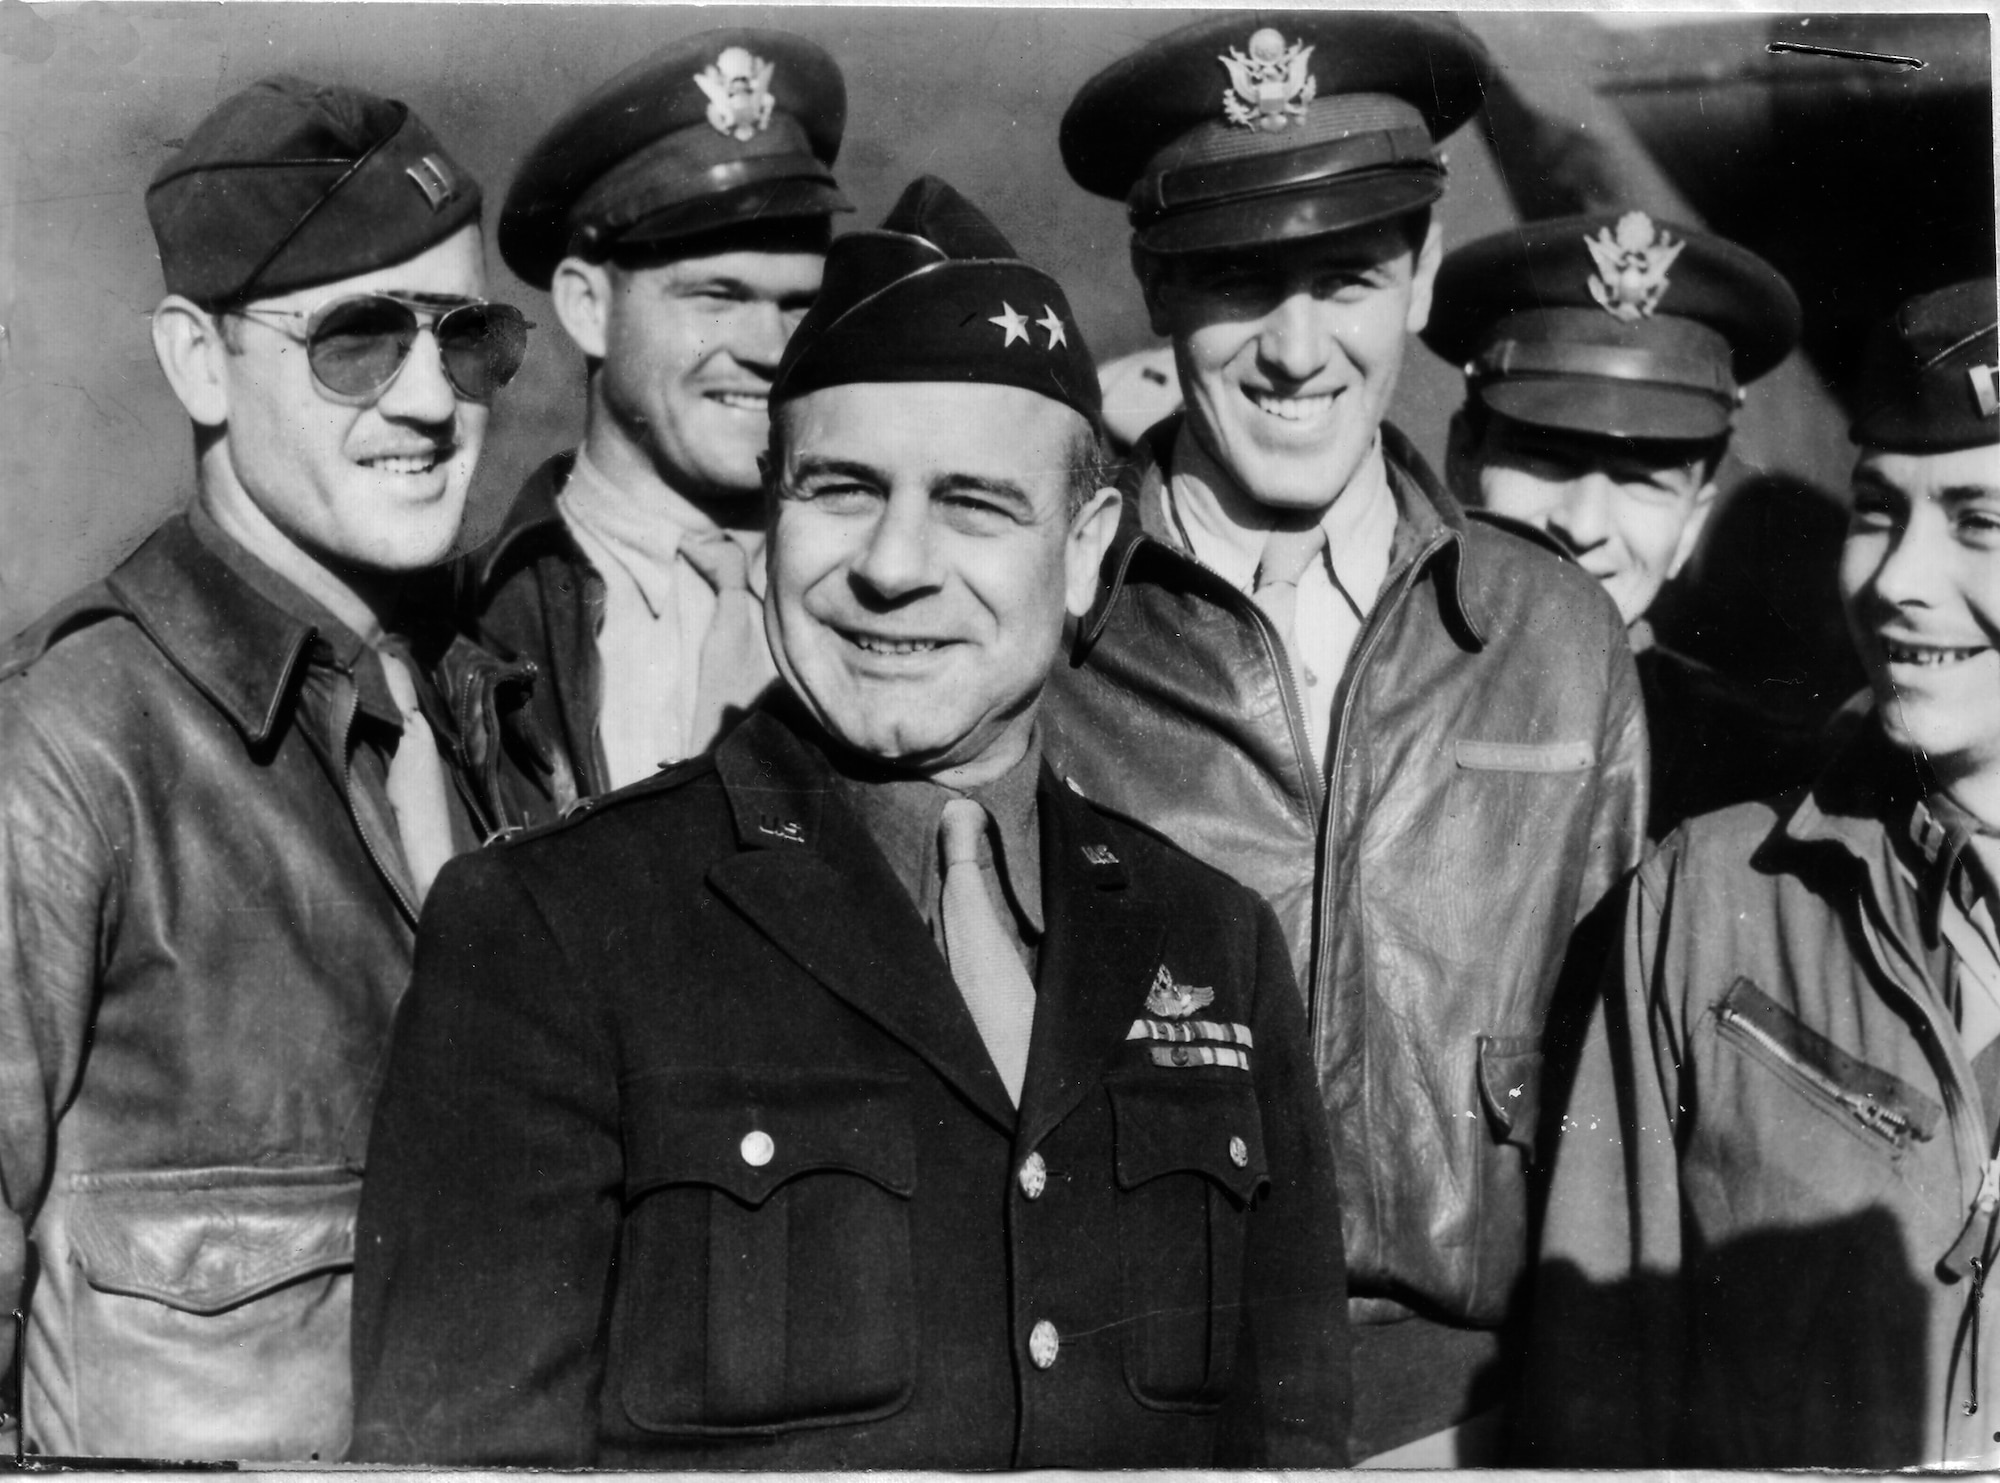 Lt. Gen. James H. Doolittle (center), commander of the Army Air Forces  Eighth Air Force, is surrounded by a group of U.S. flyers. (This picture was taken before his promotion to lieutenant general.)  The general took part in the first raid on Tokyo on April 18,1942, when a squadron took off from the USS Hornet in the North Pacific Ocean to bomb military installations in Japan. (U.S. Air Force photo)